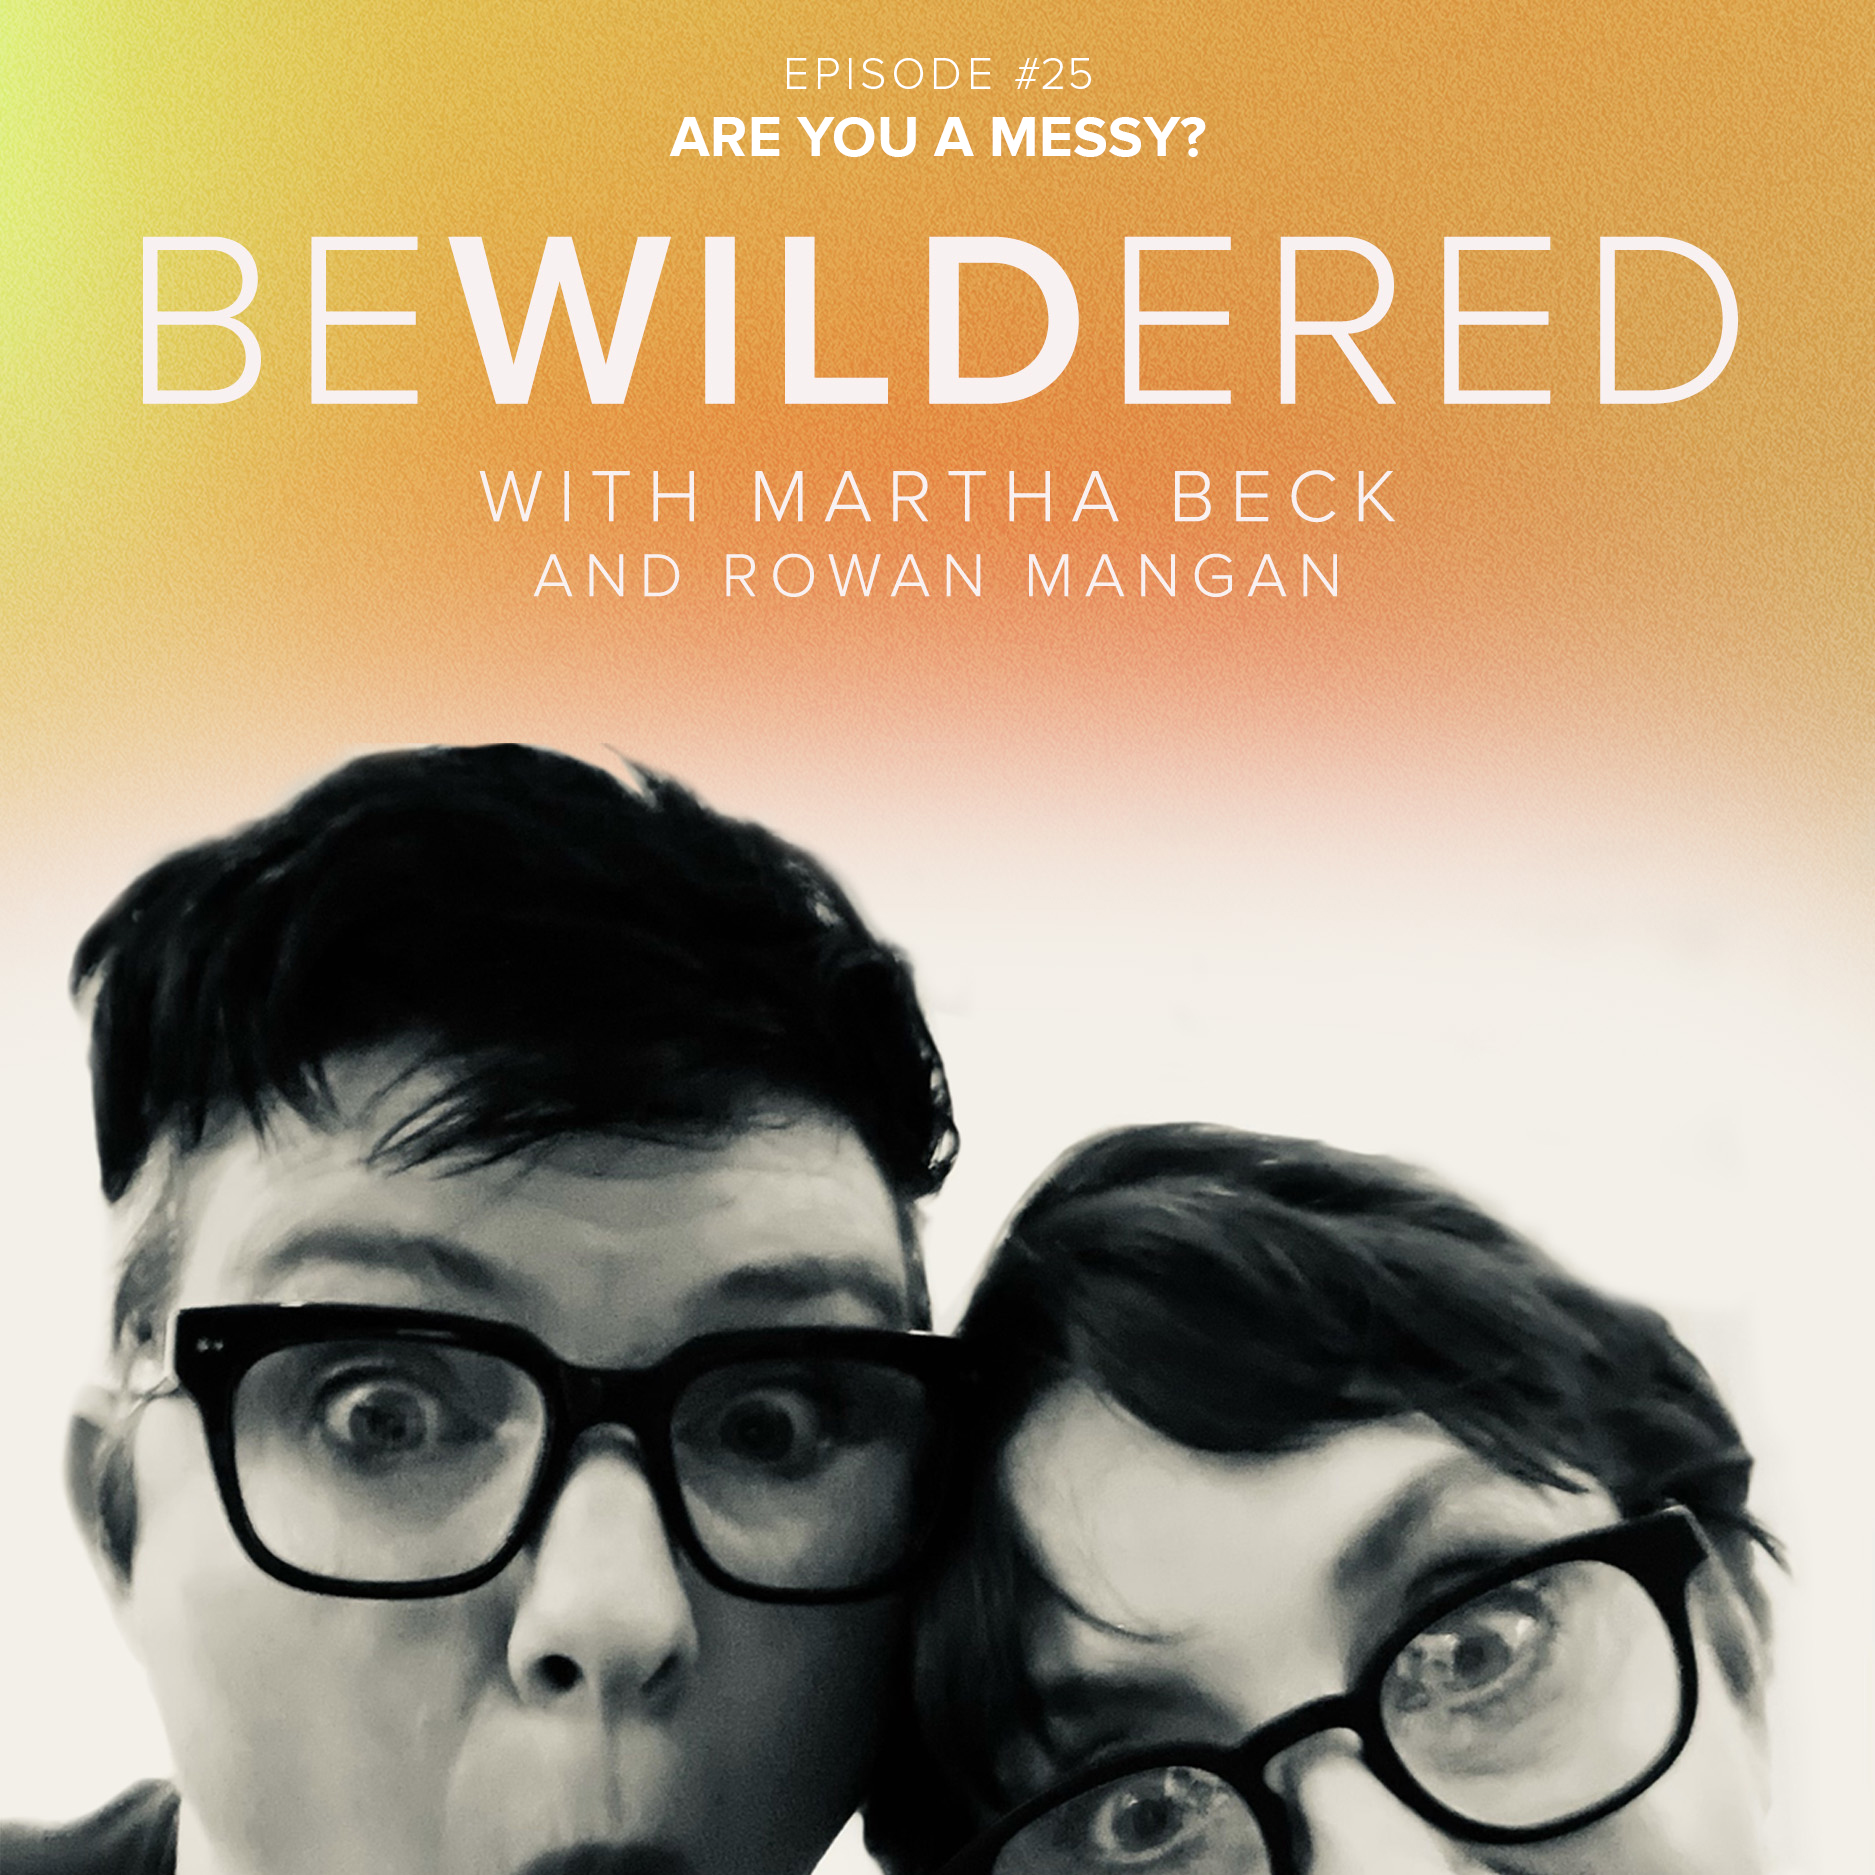 Image for Episode #25 Are You a Messy? for the Bewildered Podcast with Martha Beck and Rowan Mangan